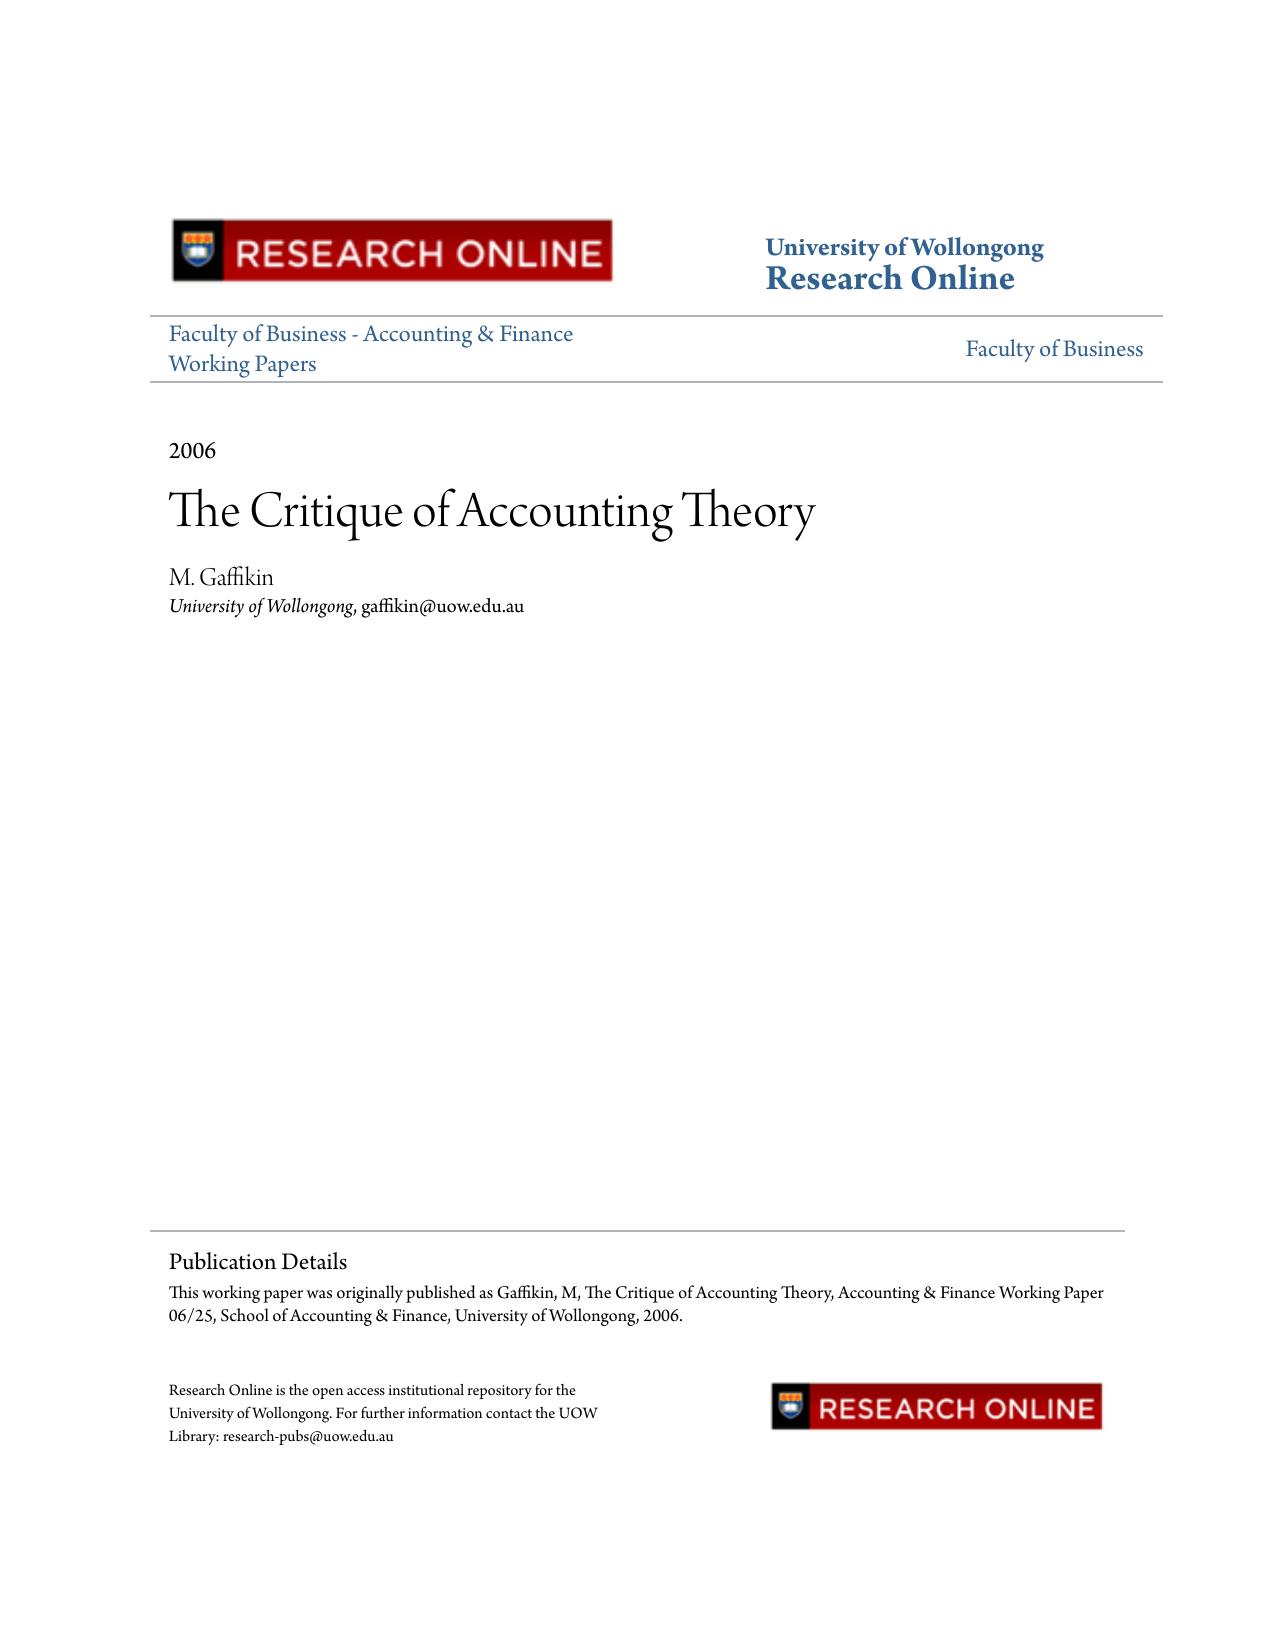 The Critique of Accounting Theory